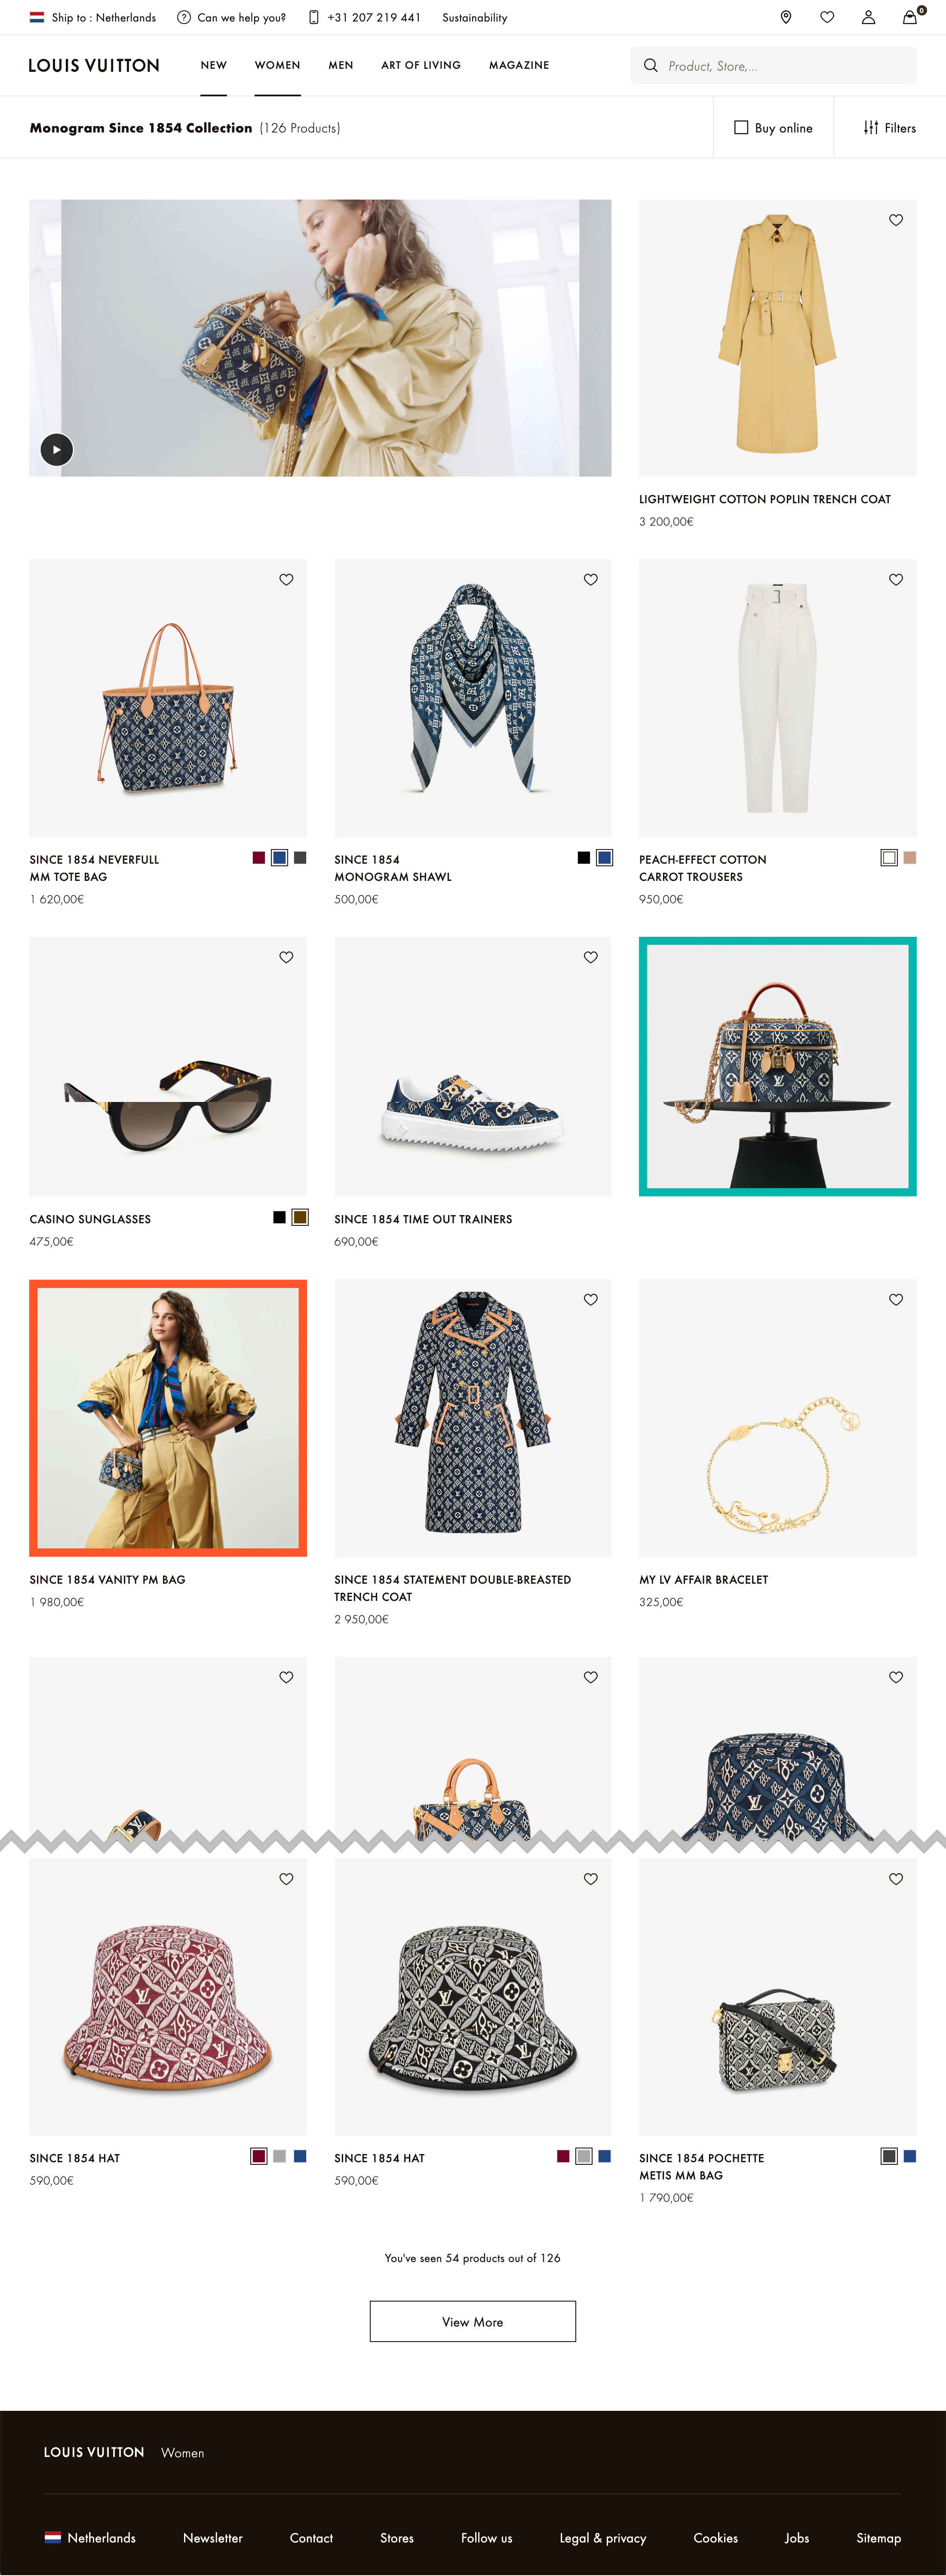 Luxury Brands Guide to Email Marketing 4 Top Strategies With Examples